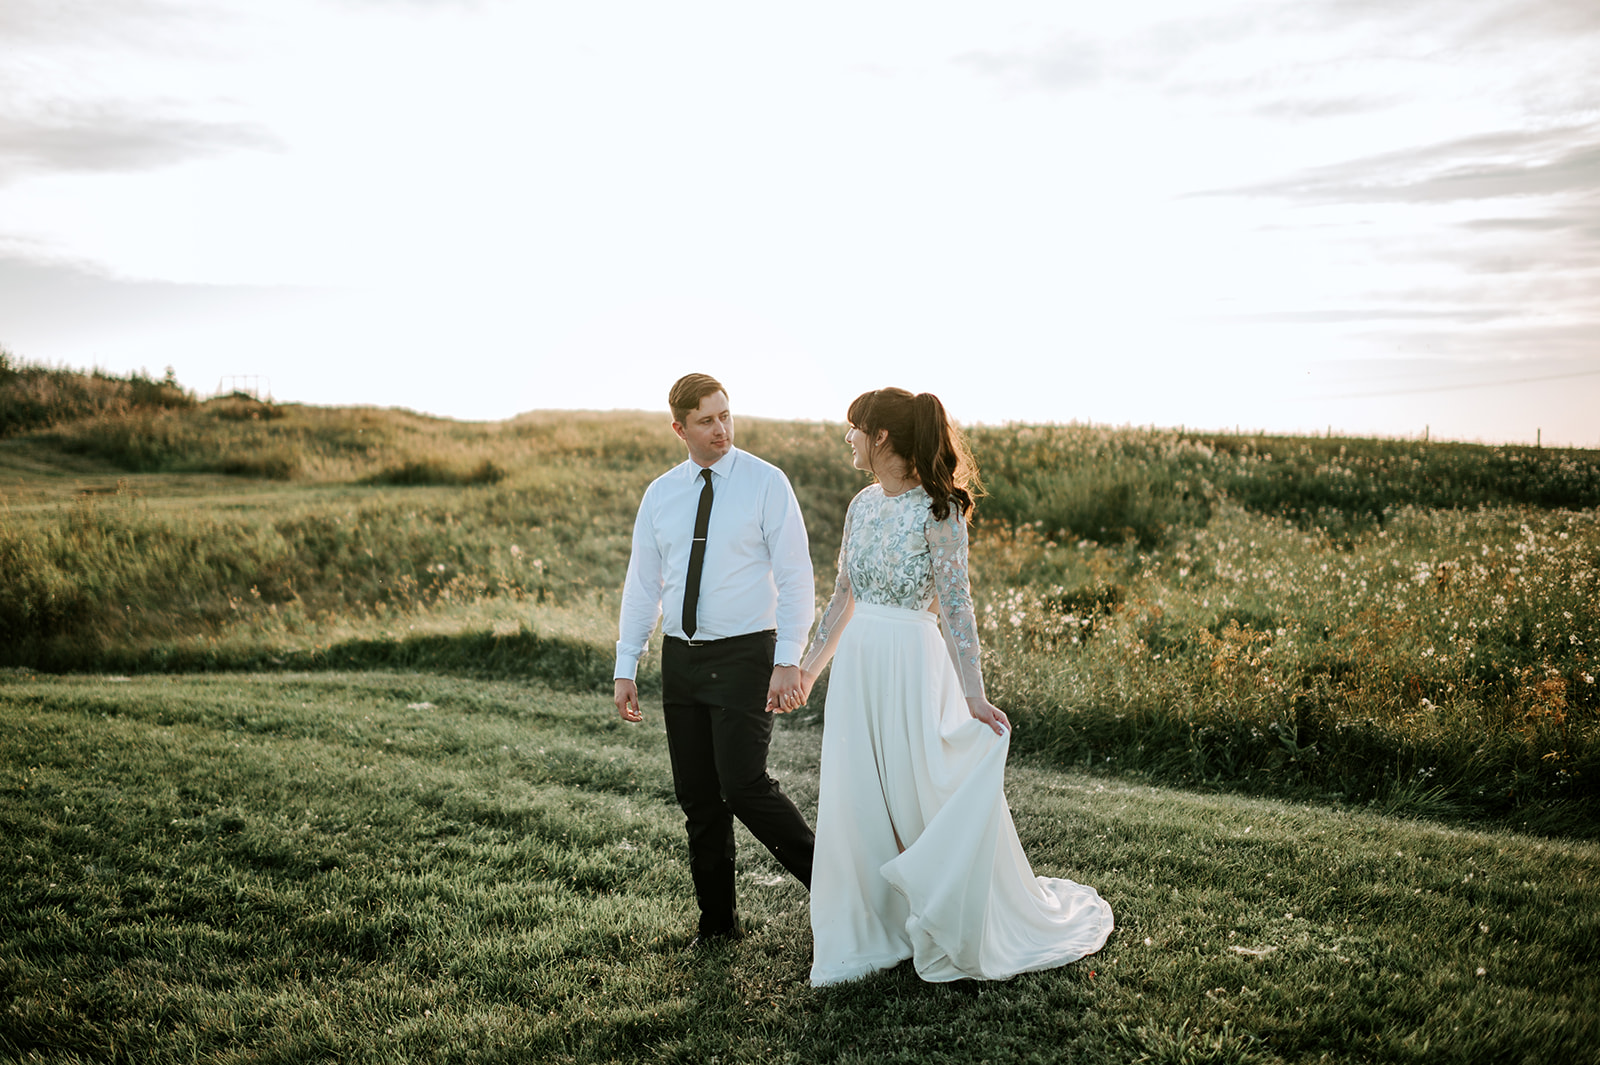 An artful day with a bride and groom walking through a grassy field at sunset.